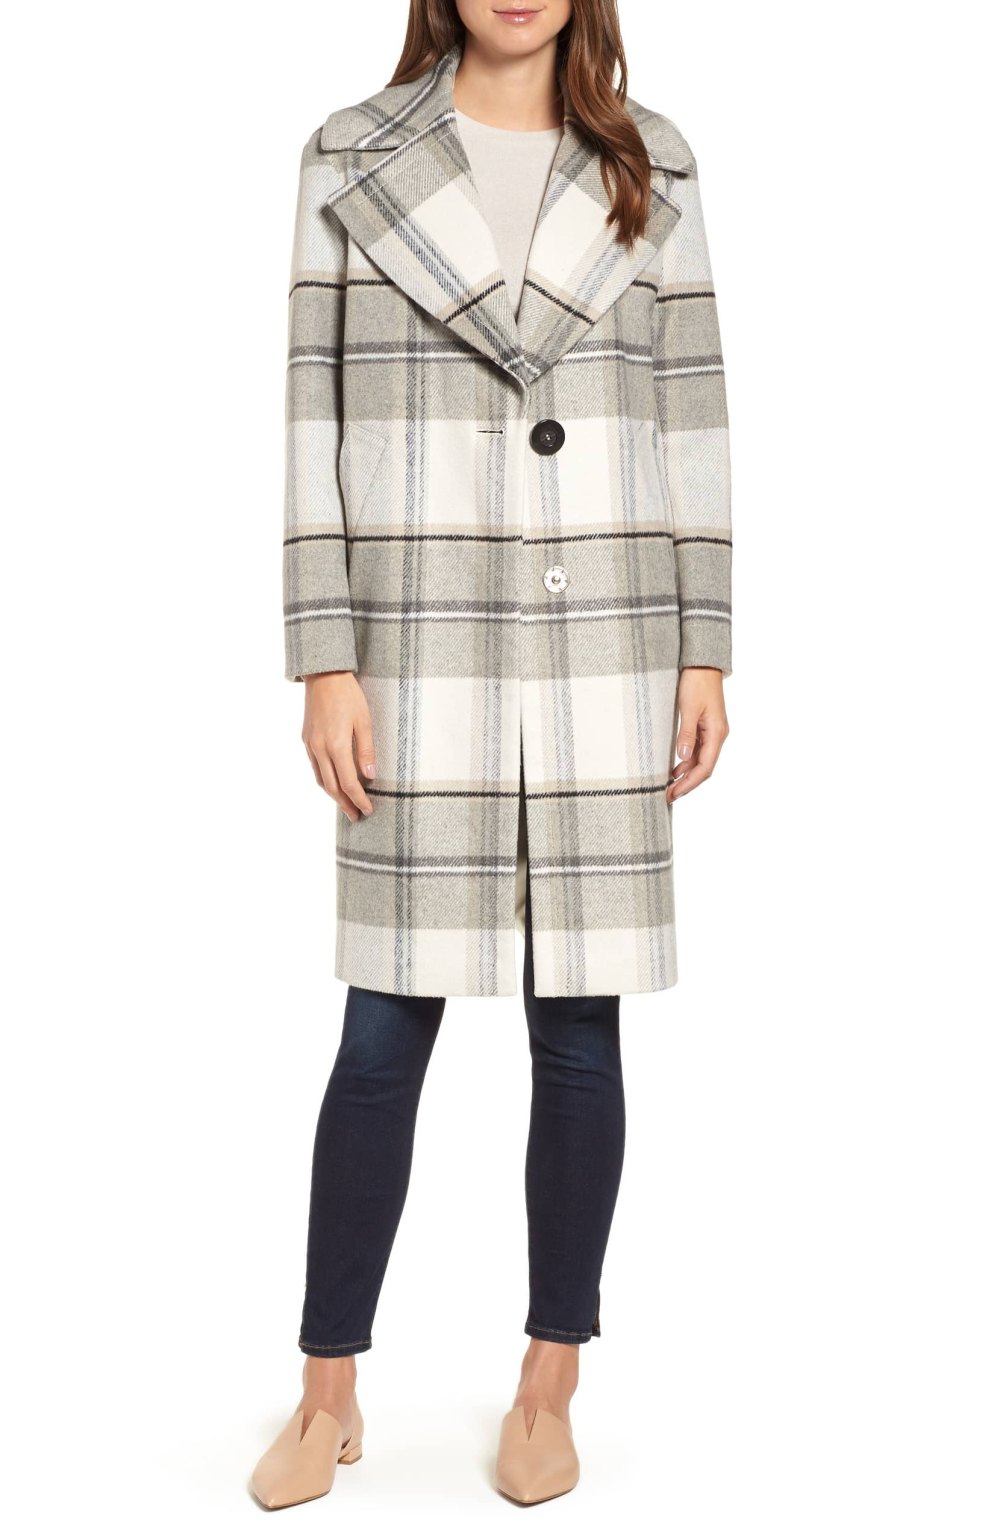 Shop This Chic Plaid Coat for Your Cold Weather Wardrobe | Us Weekly